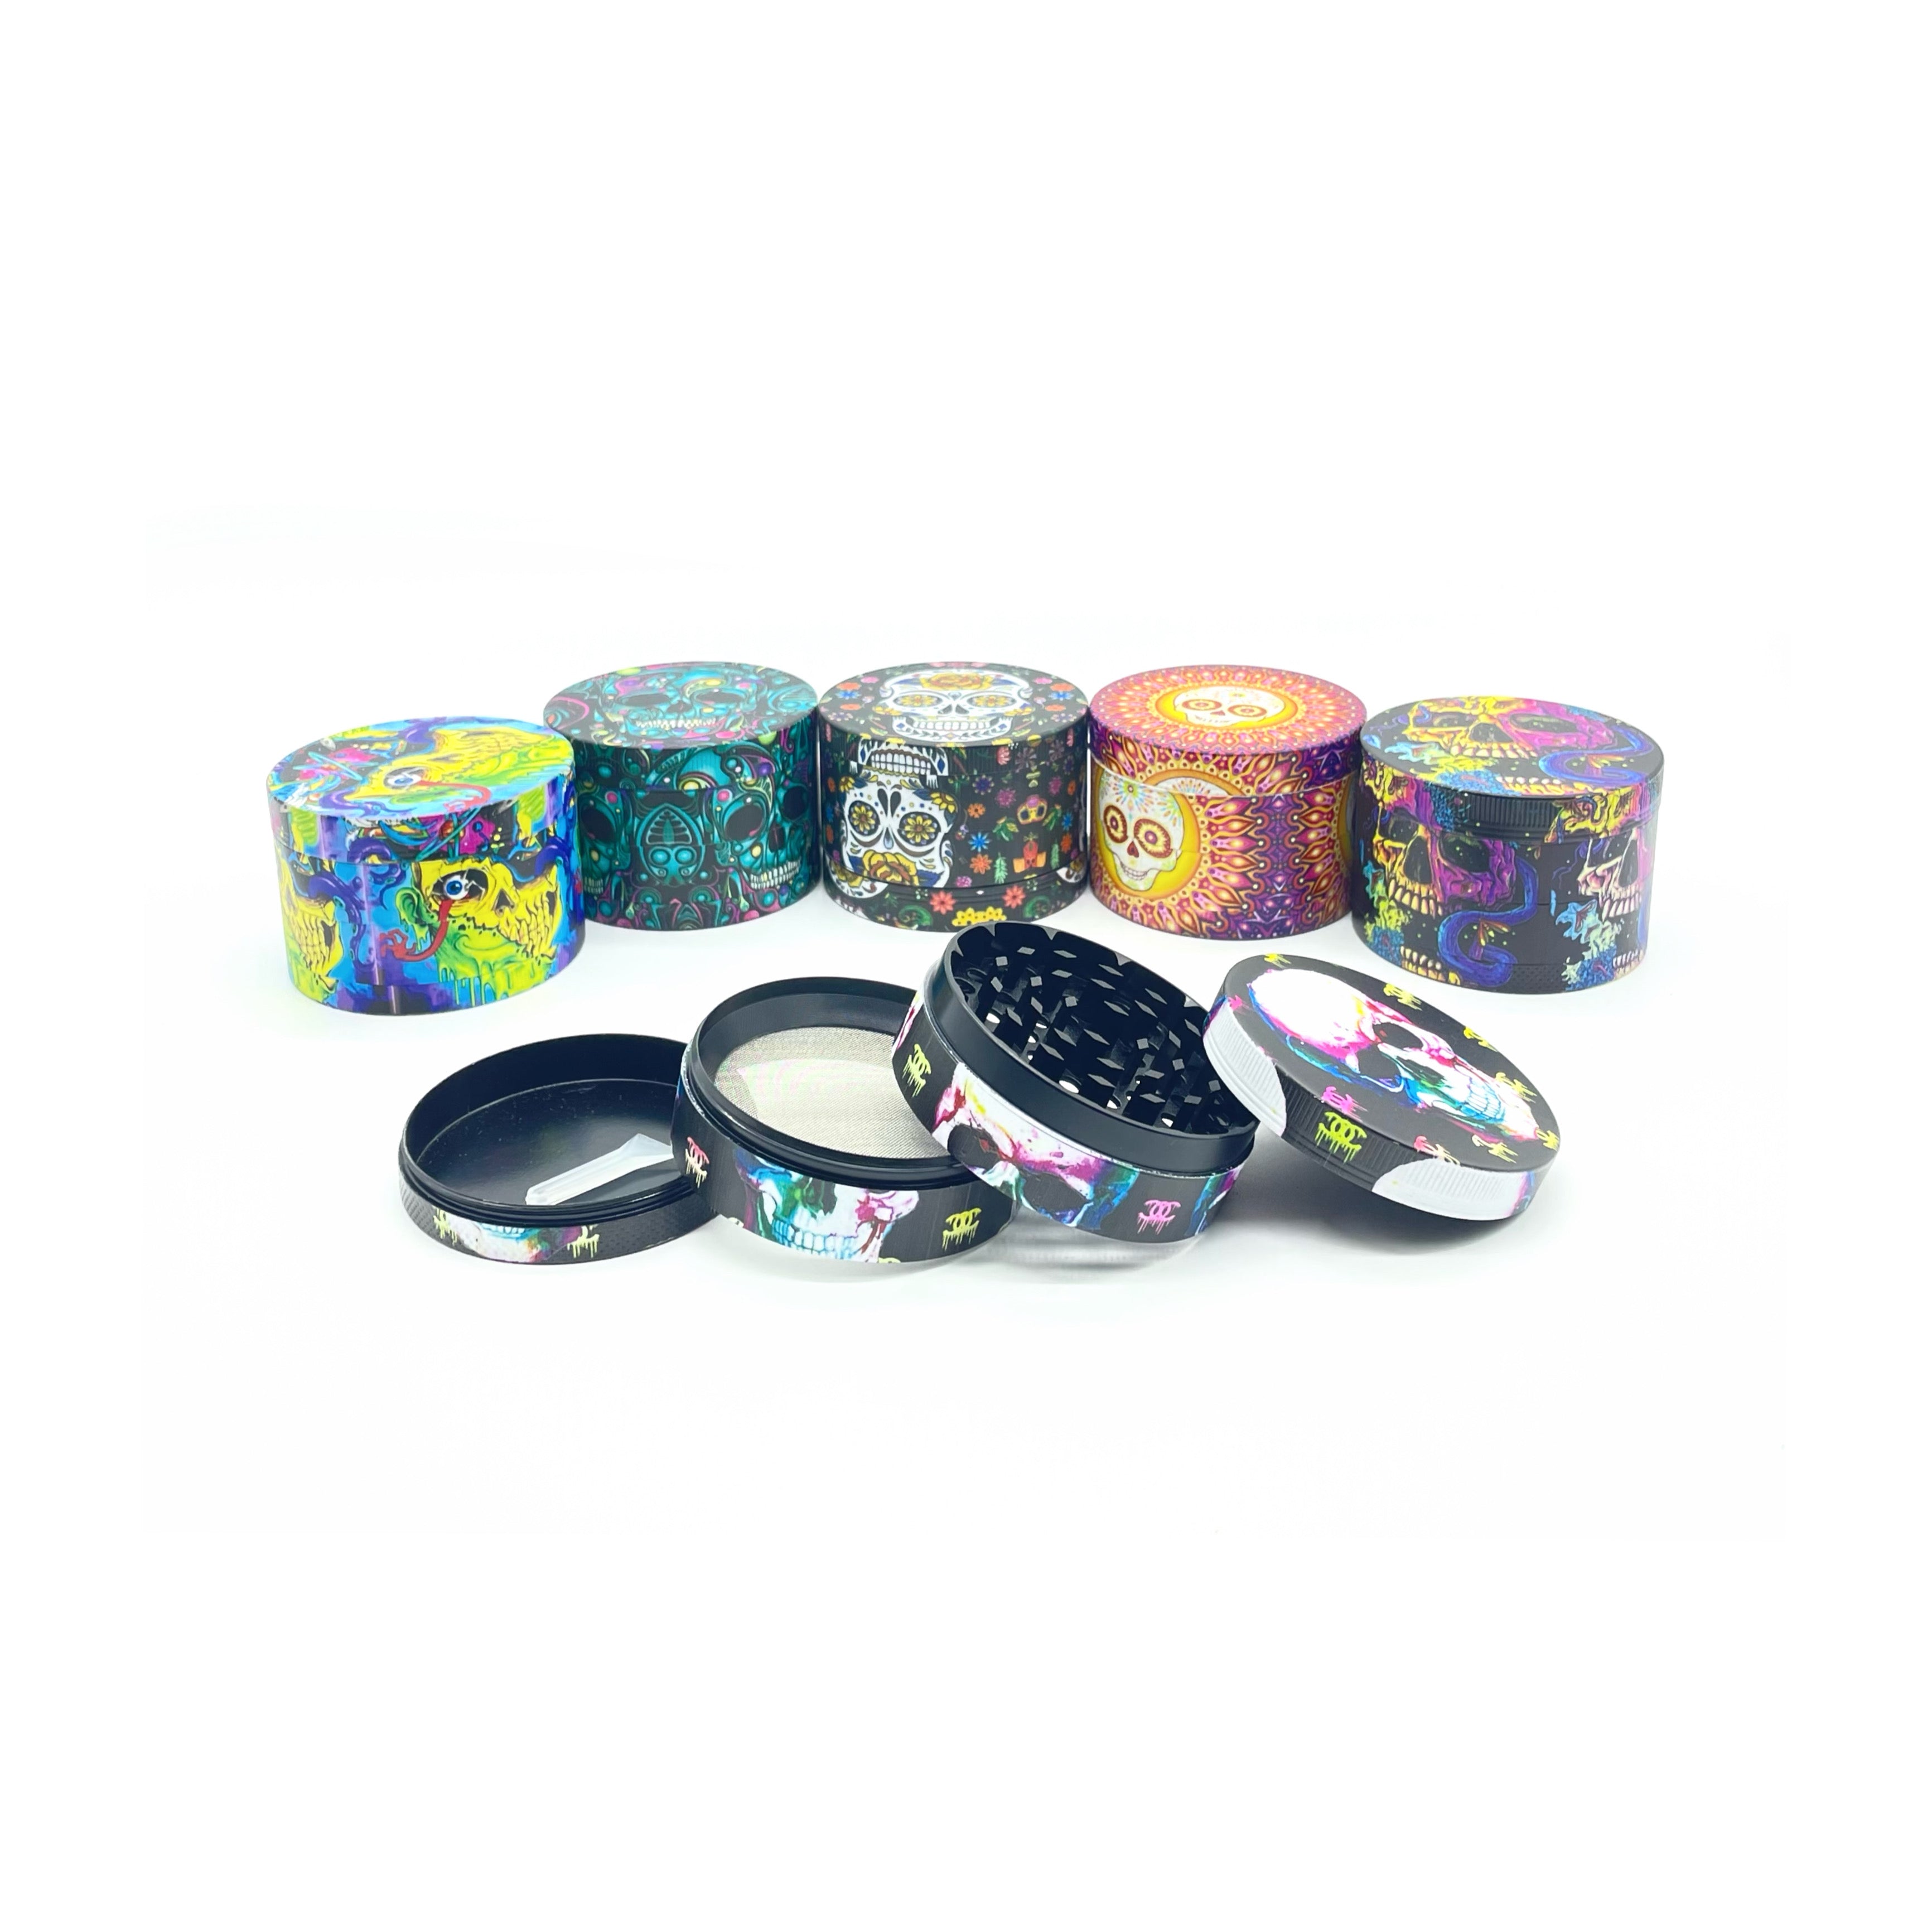 Assorted Colorful Skull Designed Metal 4-Stage Grinders Wholesale - 1 Box / 6pcs